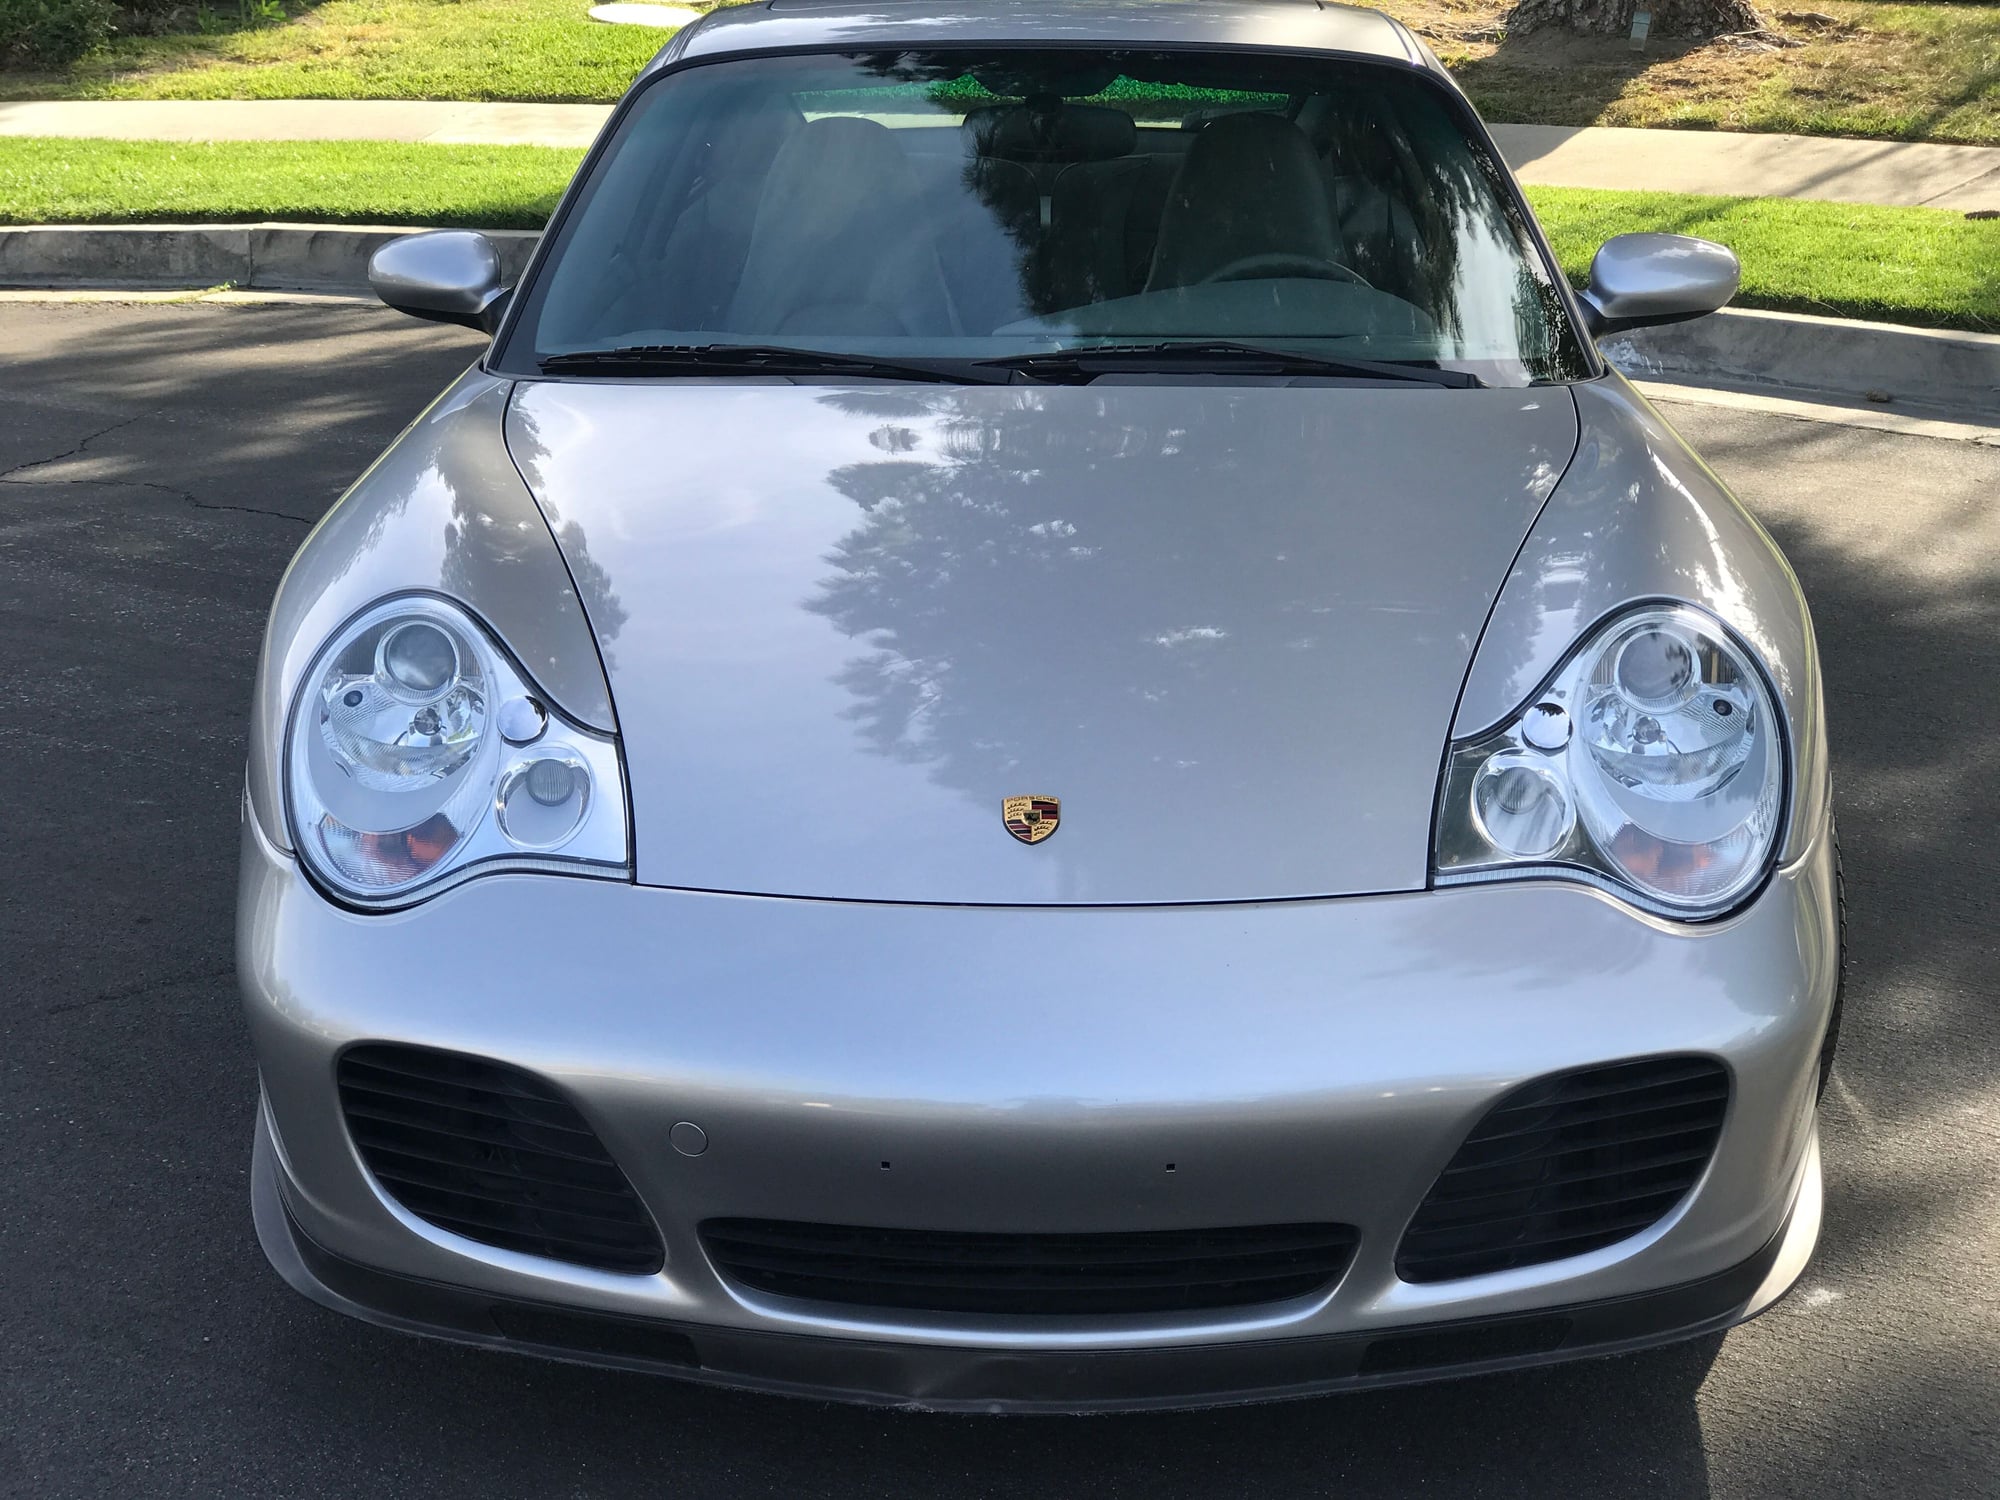 2002 Porsche 911 - 2002 Turbo, Arctic Silver/gray 6-speed 39K miles UNMOLESTED - Used - VIN WP0AB29922S686321 - 39,000 Miles - 6 cyl - AWD - Manual - Coupe - Silver - Los Angeles, CA 91356, United States